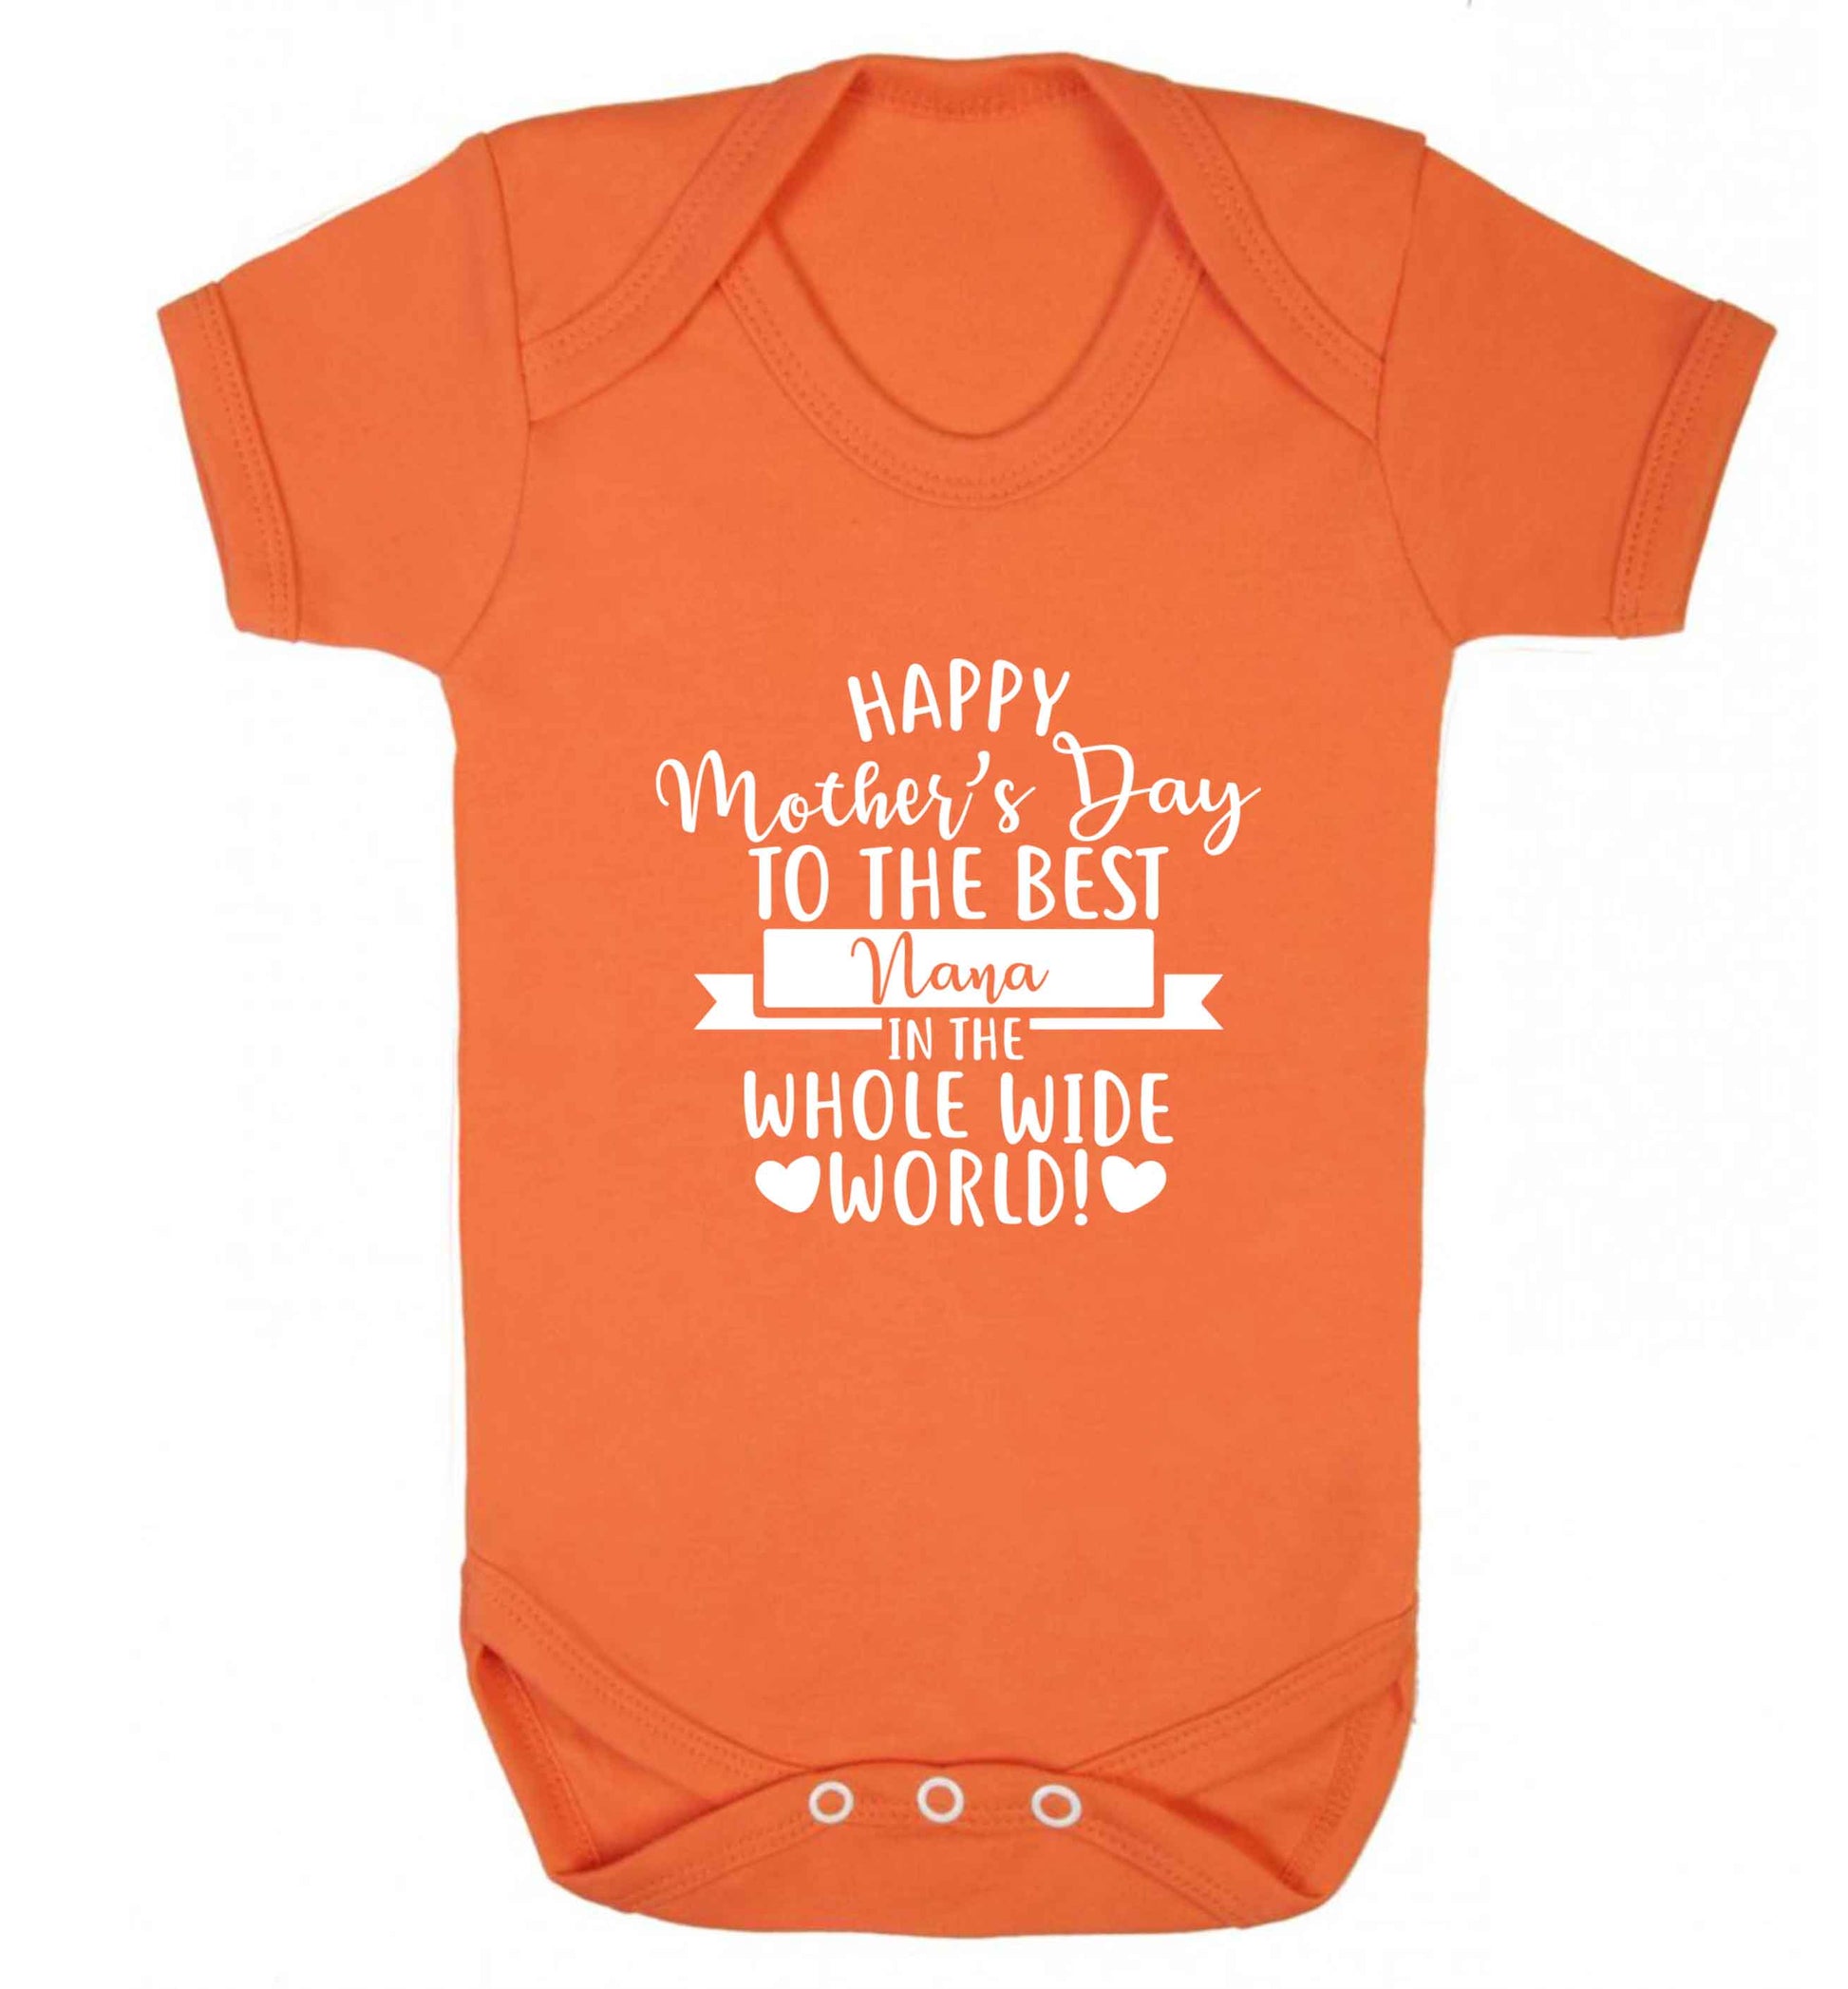 Happy mother's day to the best nana in the world baby vest orange 18-24 months